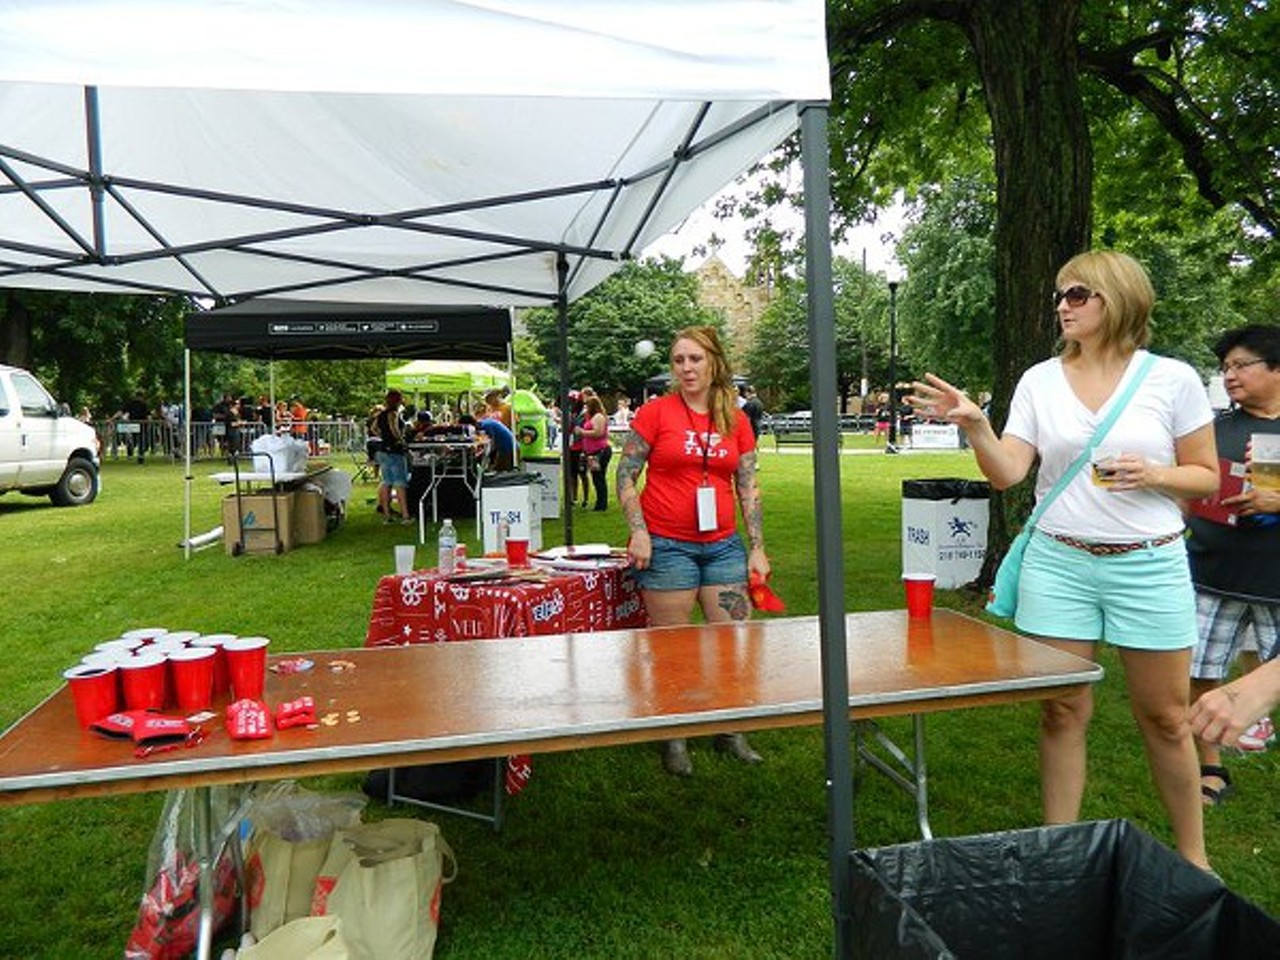 Brush up on your frat party skills (we know you haven't lost them yet).